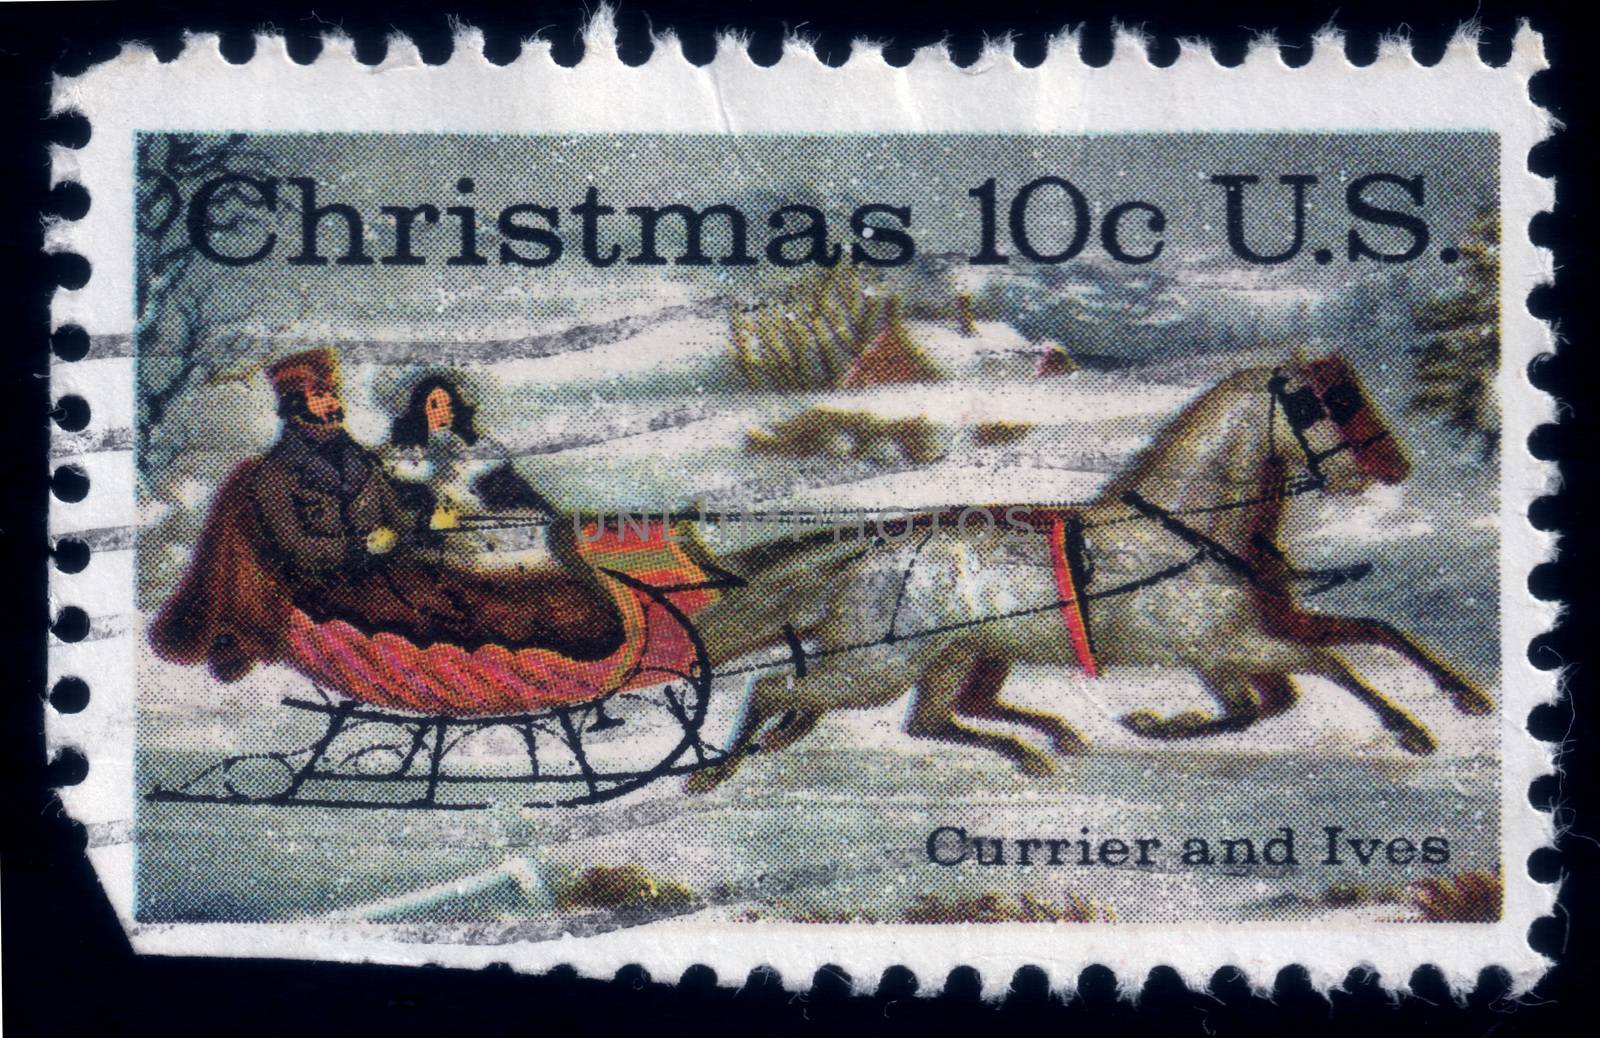 Couple runs fast on a sleigh in Winter. Currier and Ives's picture. USA Postage Stamp. Uploaded in 2014